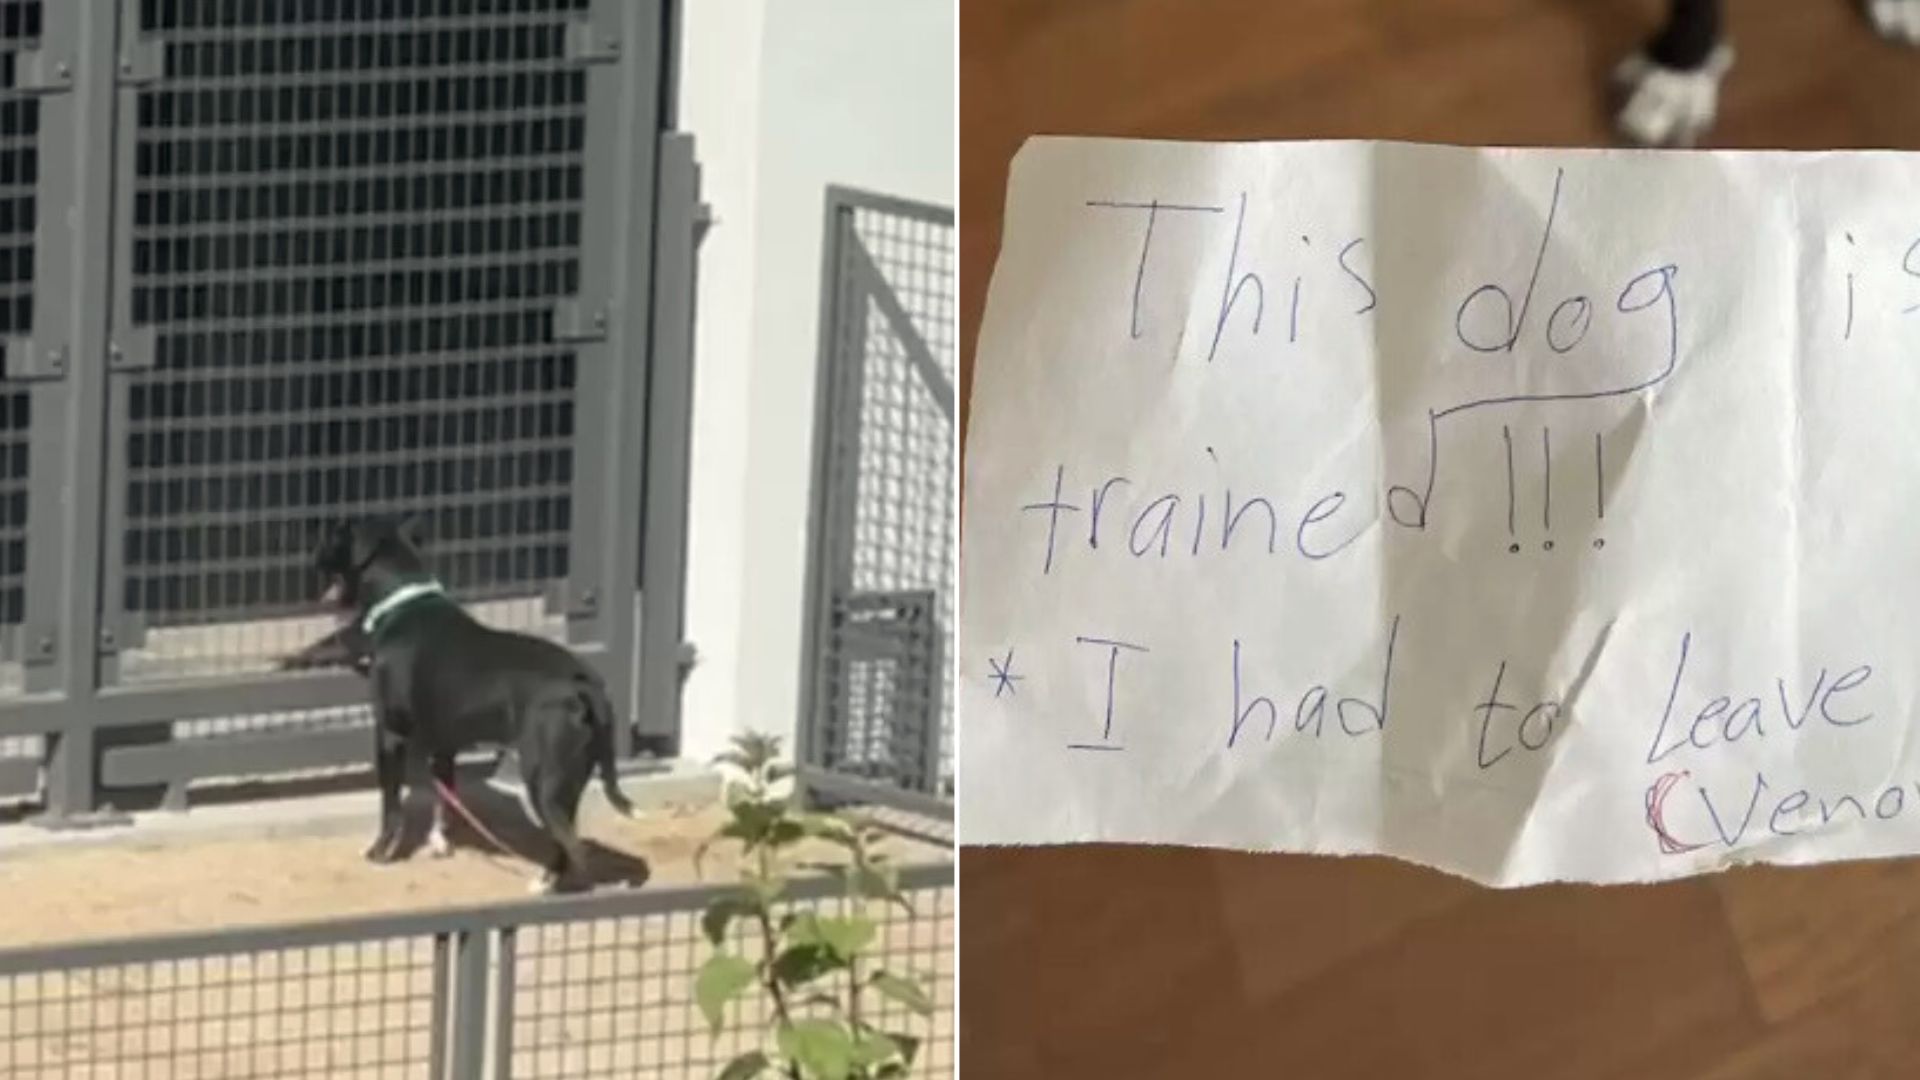 Woman Shocked To Find An Abandoned Dog Left In A Park With A Heartbreaking Note